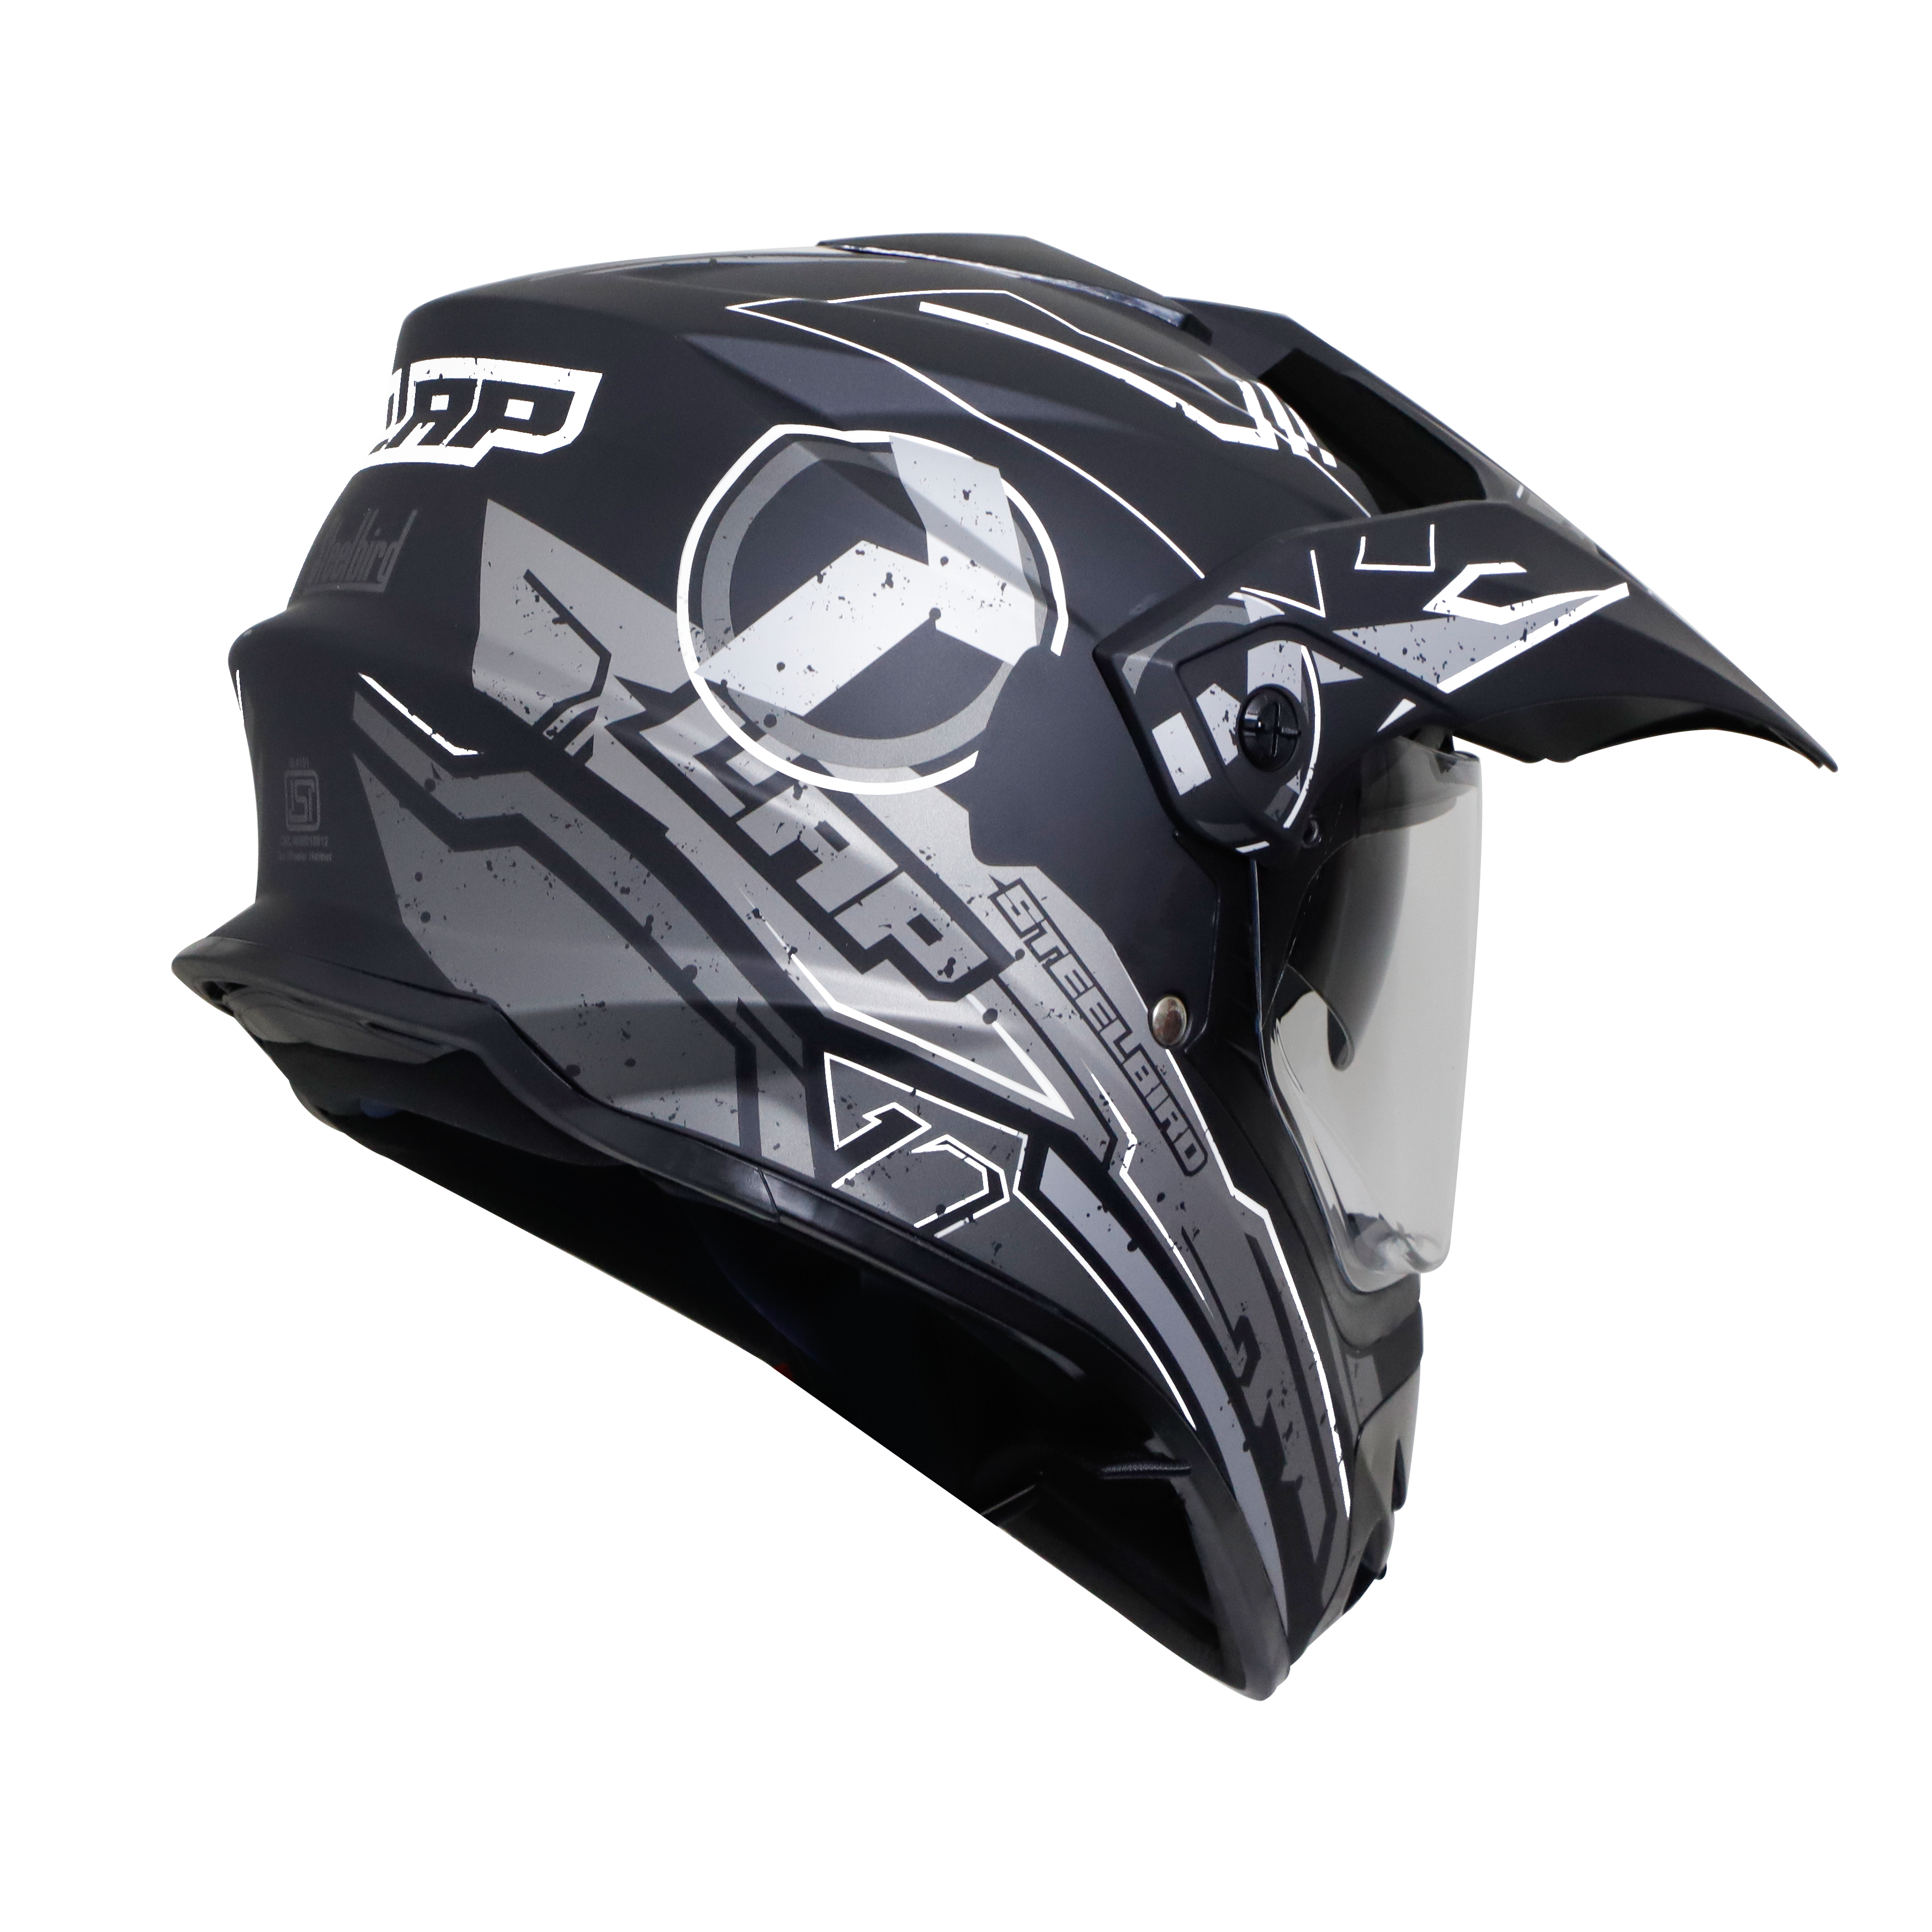 SB-42 BANG LAP GLOSSY BLACK WITH WHITE (WITH CHROME SILVER INNER SUN SHIELD)